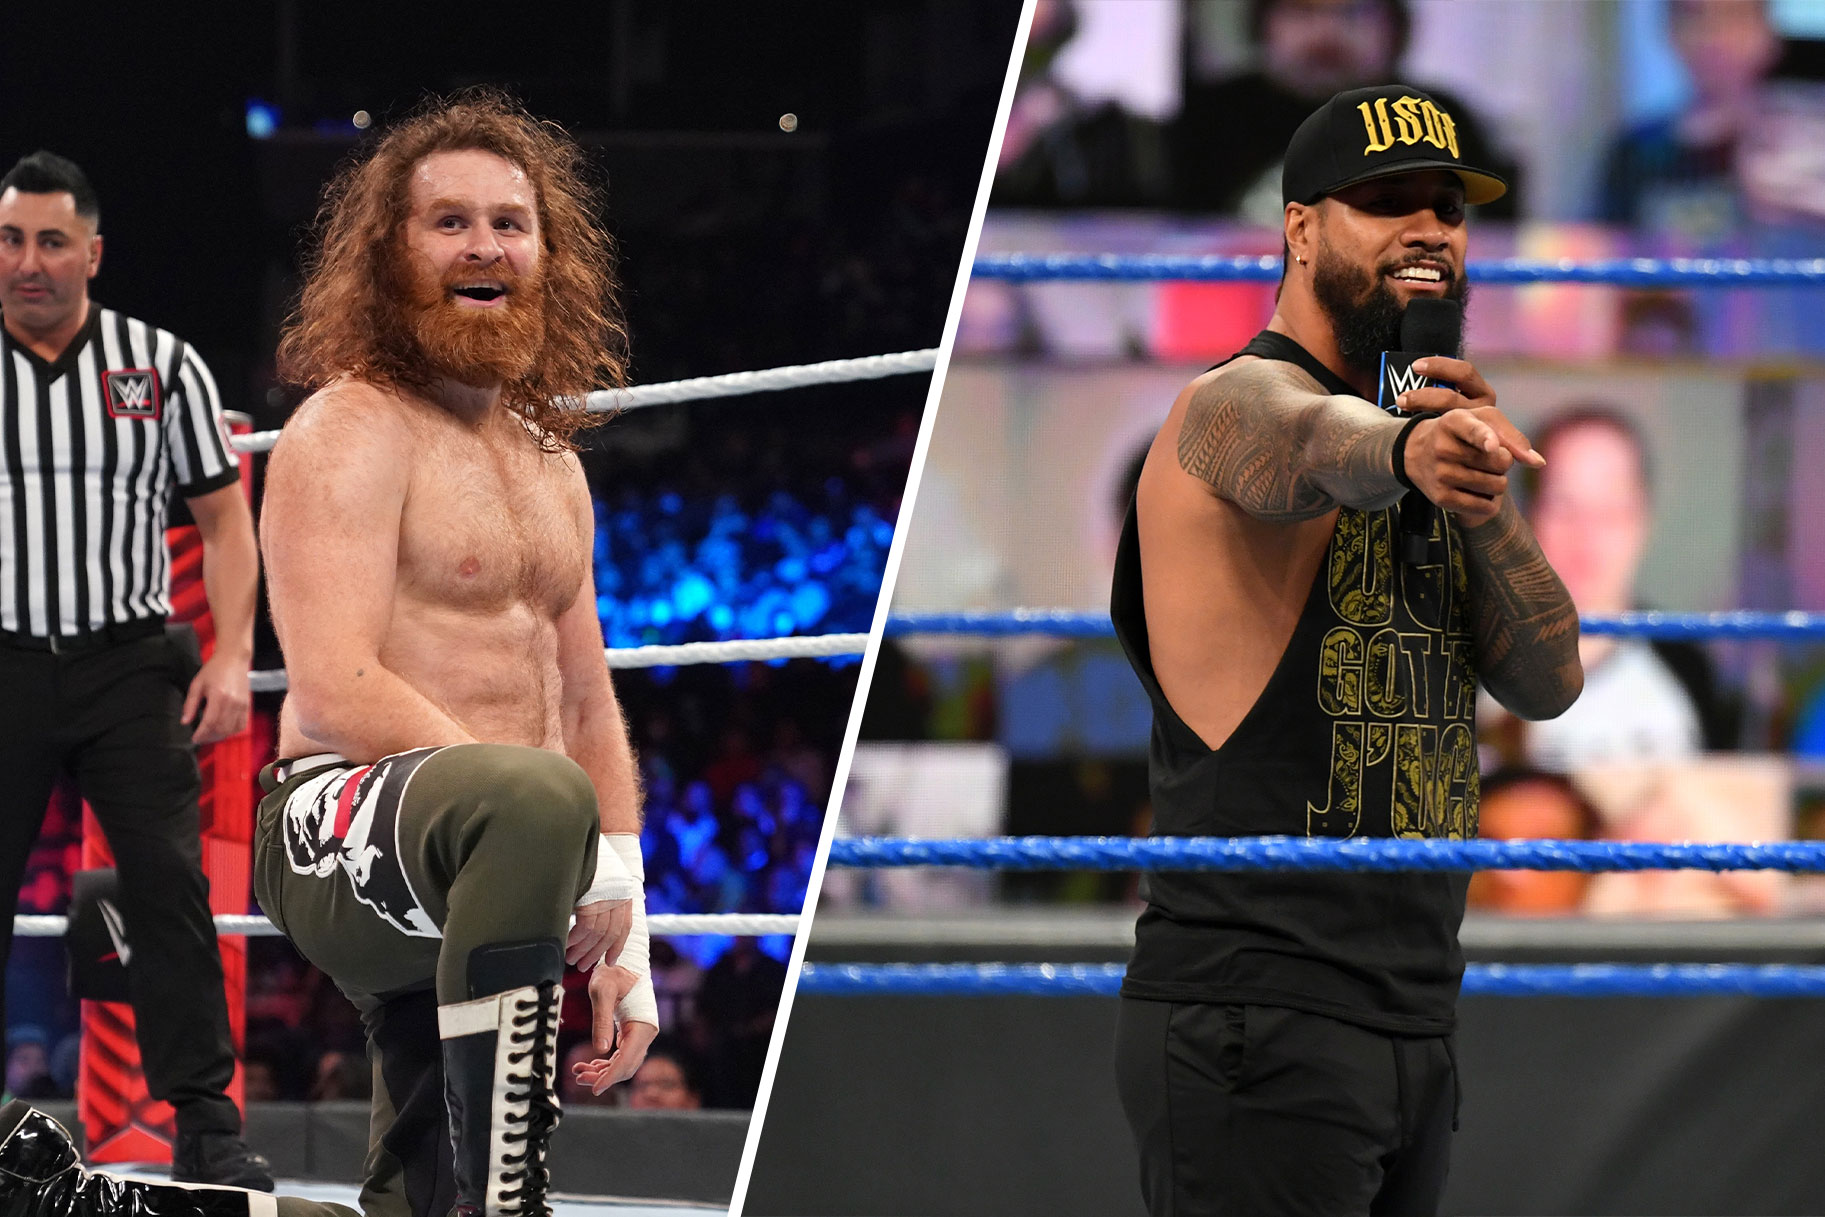 New Guards of the Ring: WWE's Next Top Superstars to Watch